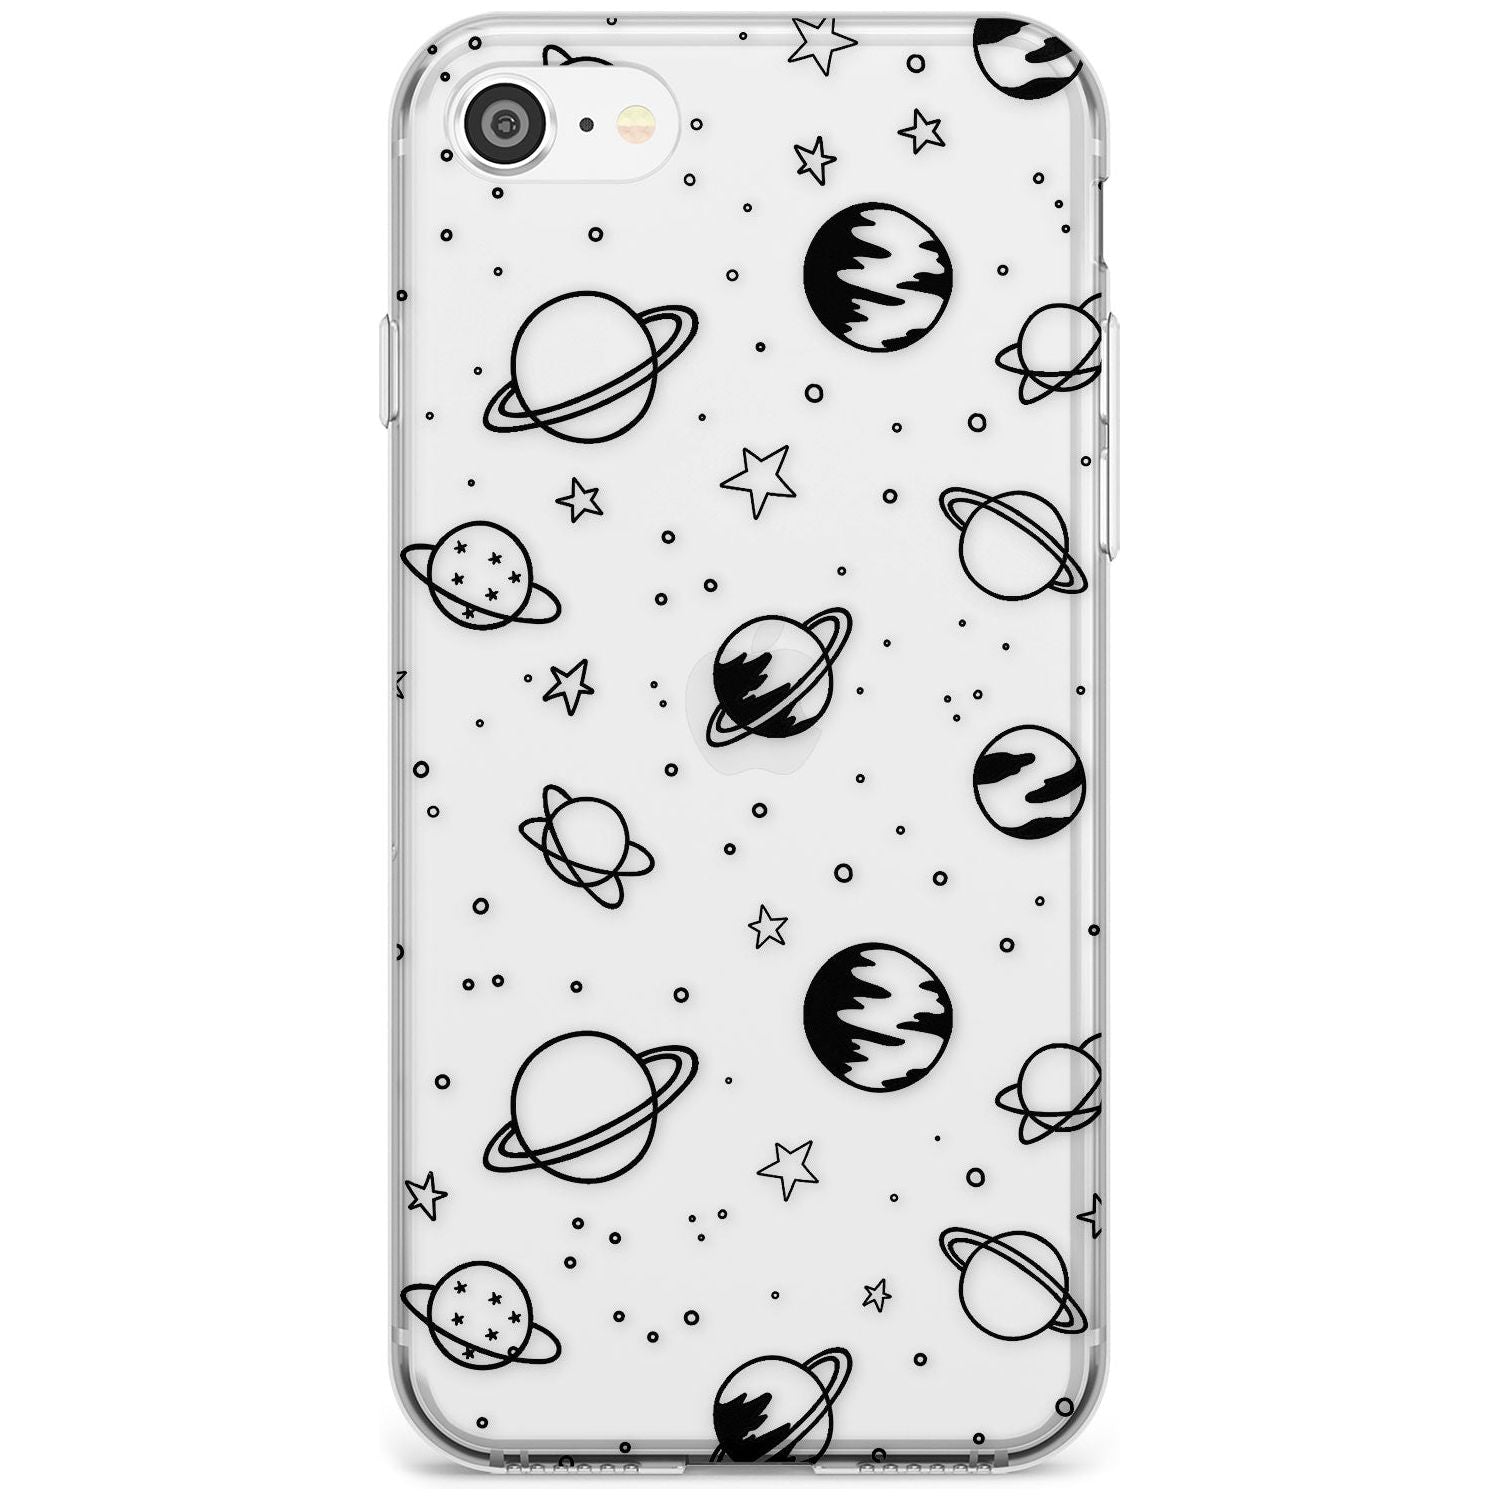 Outer Space Outlines: Black on Clear Black Impact Phone Case for iPhone SE 8 7 Plus